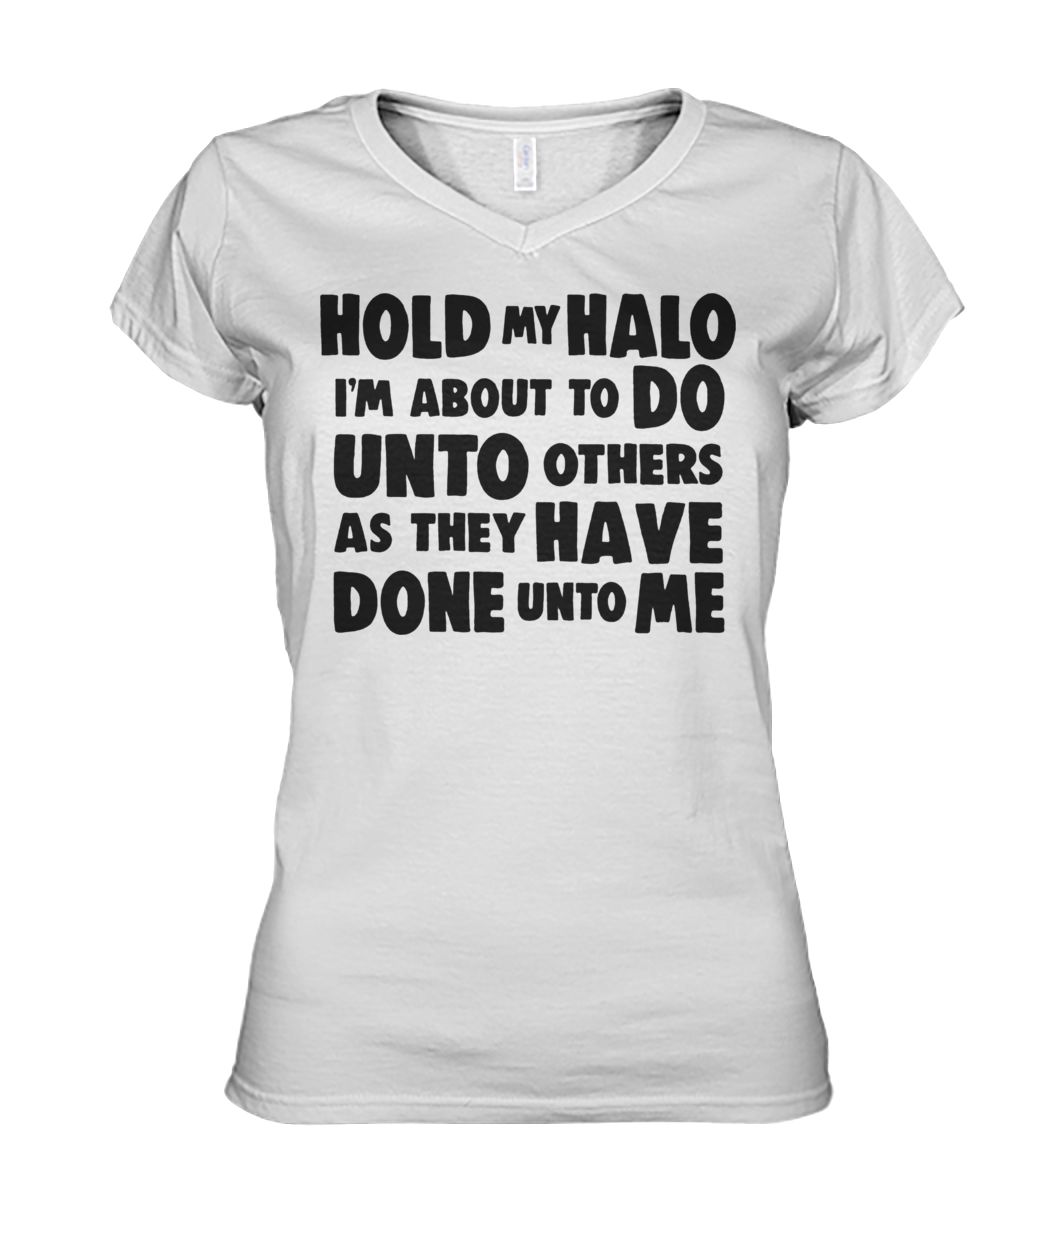 Hold my halo I'm about to do unto others as they have done unto me women's v-neck